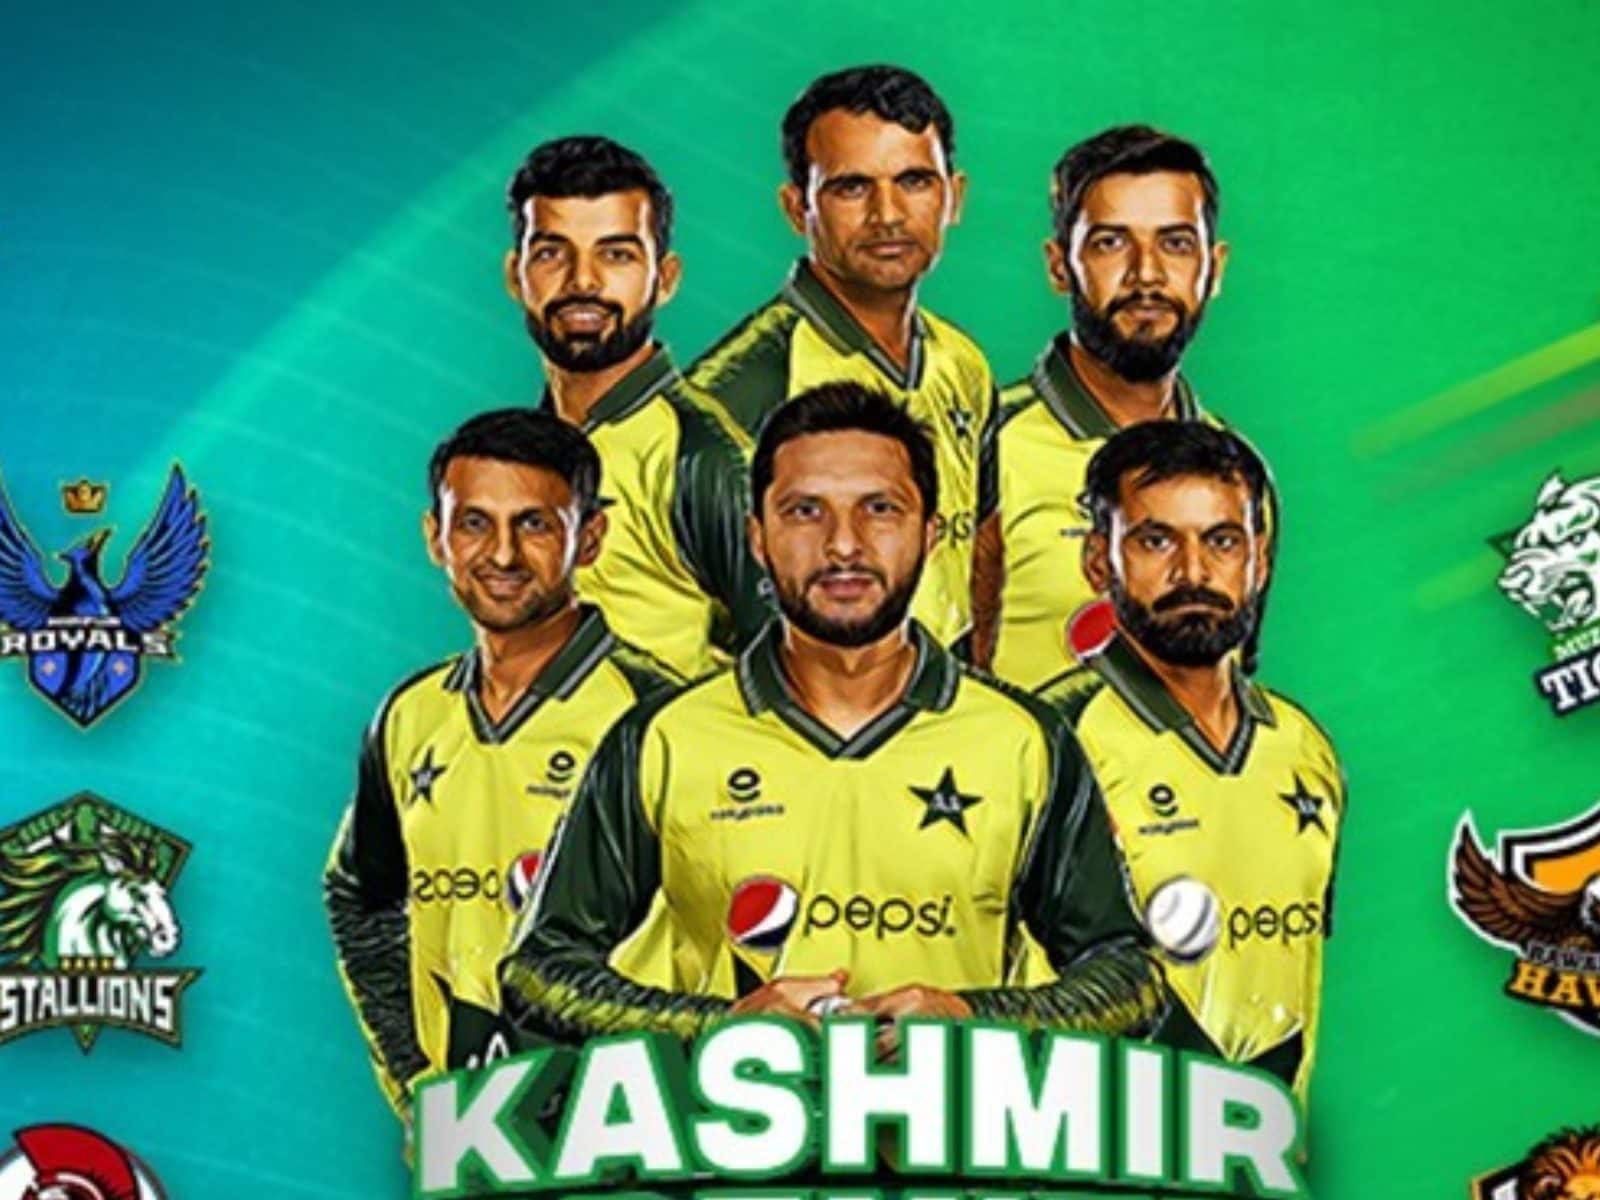 OW vs KT Dream11 Team Prediction Check Captain, Vice-Captain, and Probable Playing XIs for Todays Kashmir Premier League 2021 match, August 13, 1100 AM IST